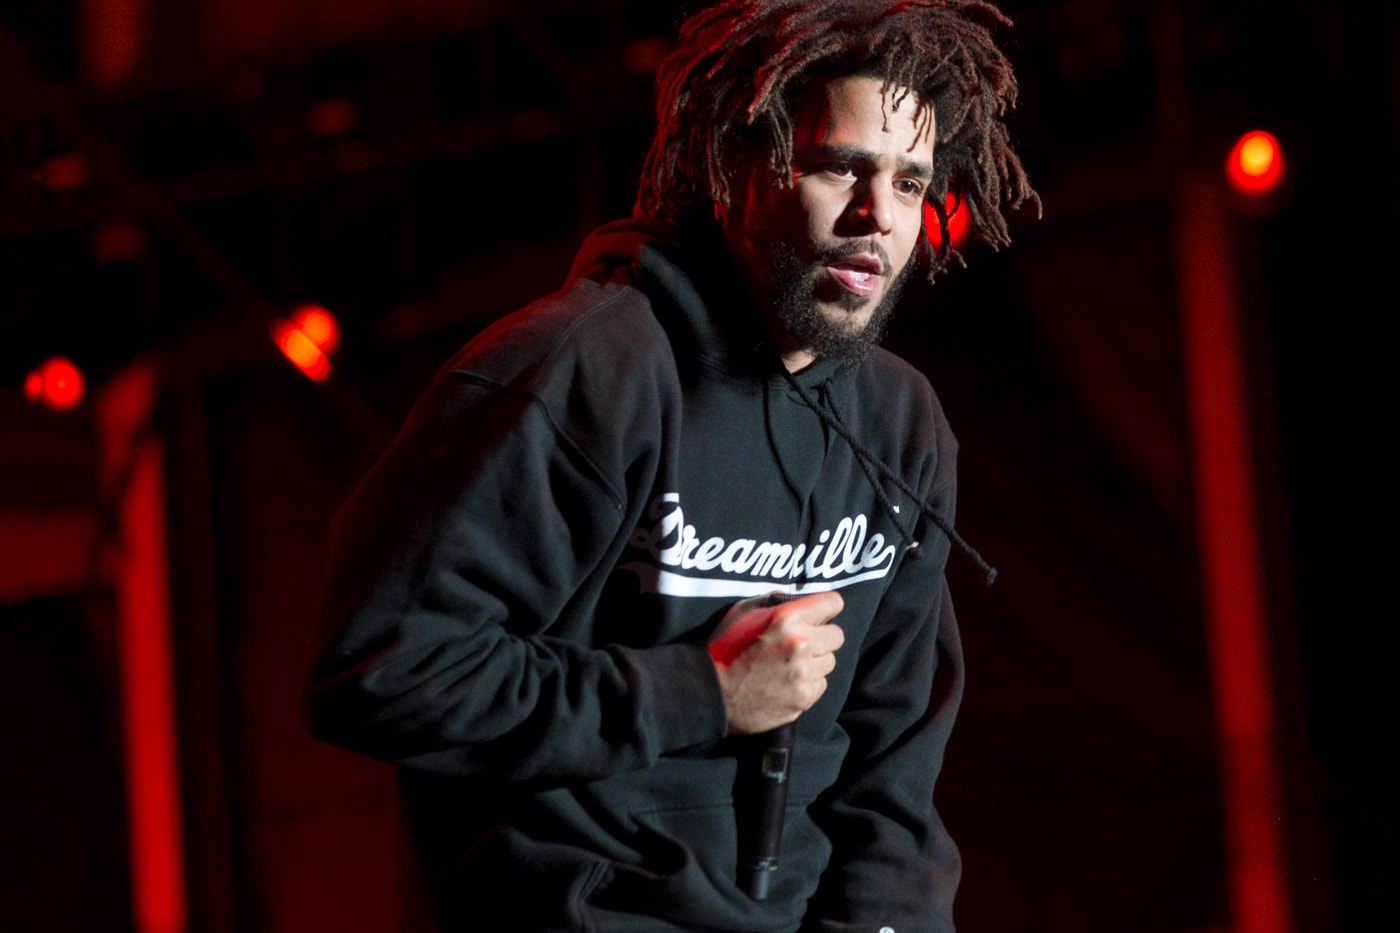 Ticketmaster Tried to Resell $700 USD Tickets to J. Cole Fans